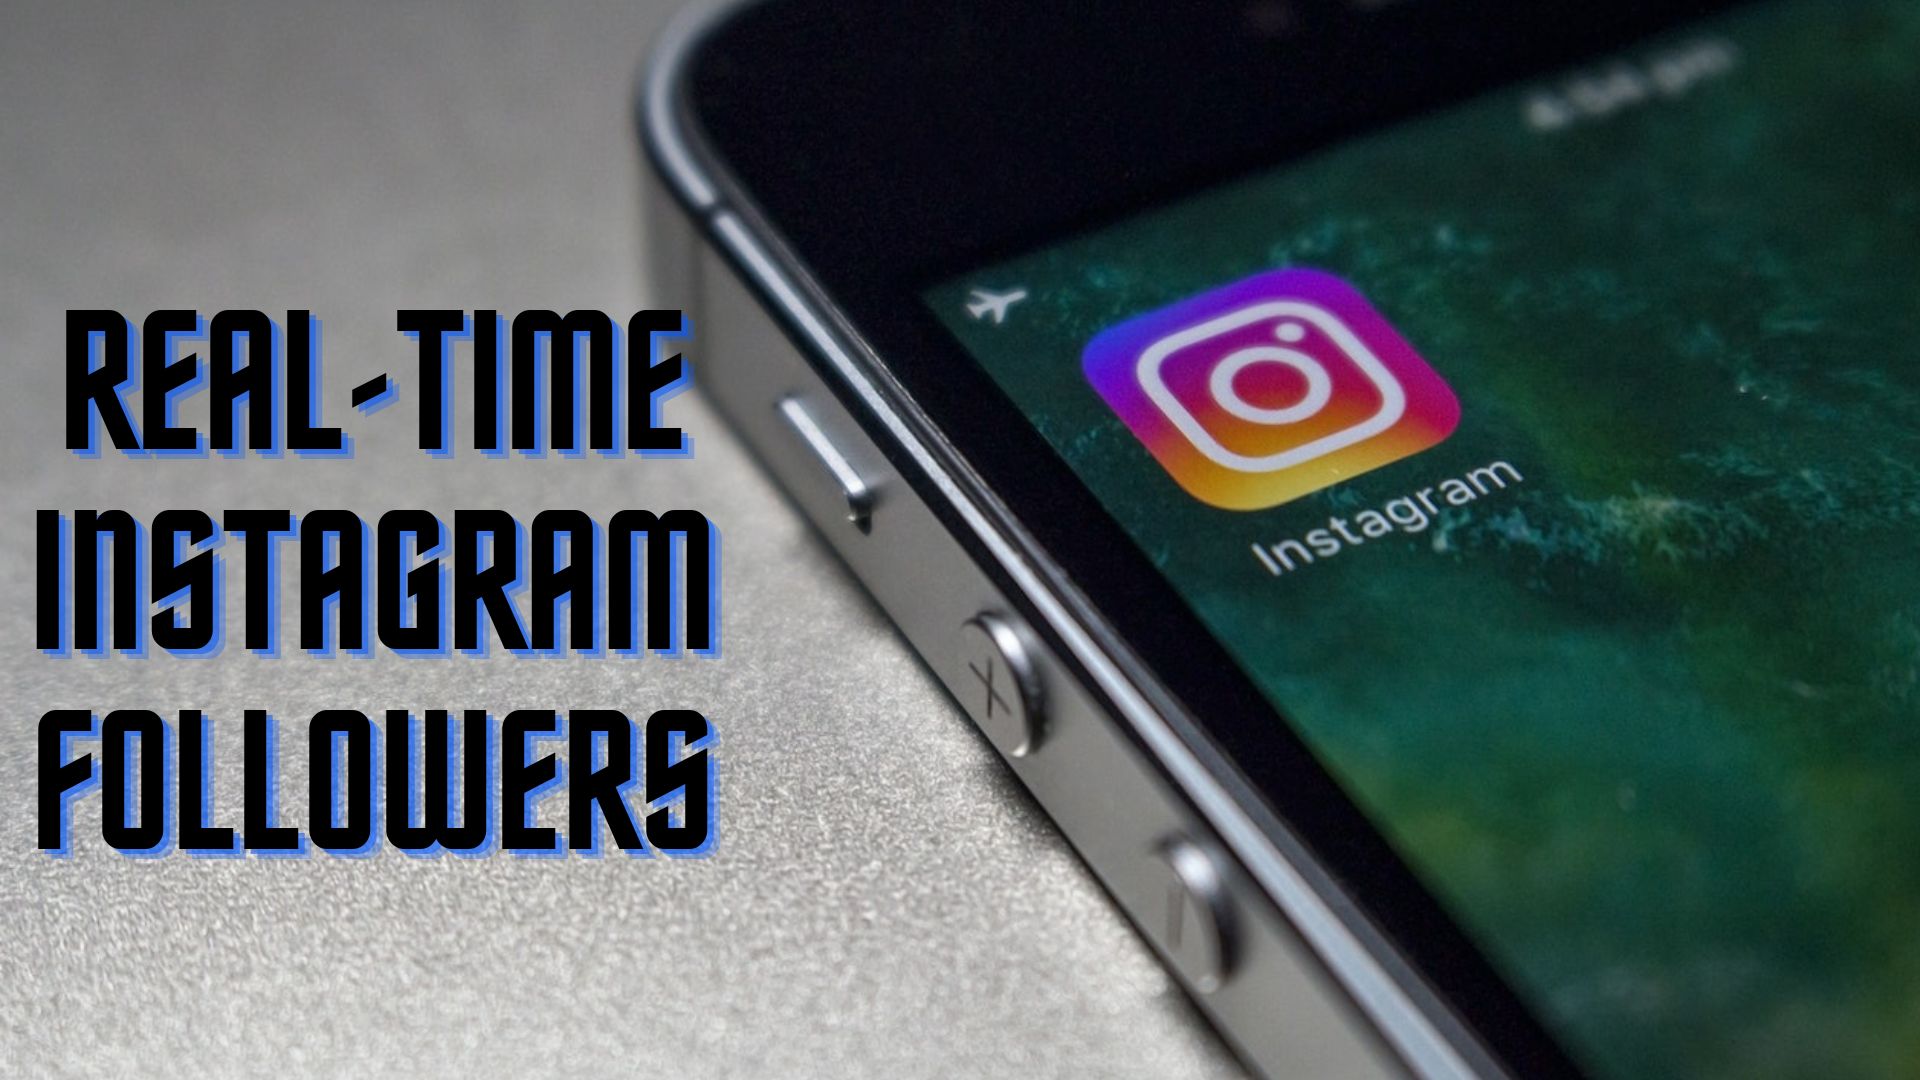 Real Time Instagram Followers - A Guide To Understanding And Maximizing Your Reach On The Platform